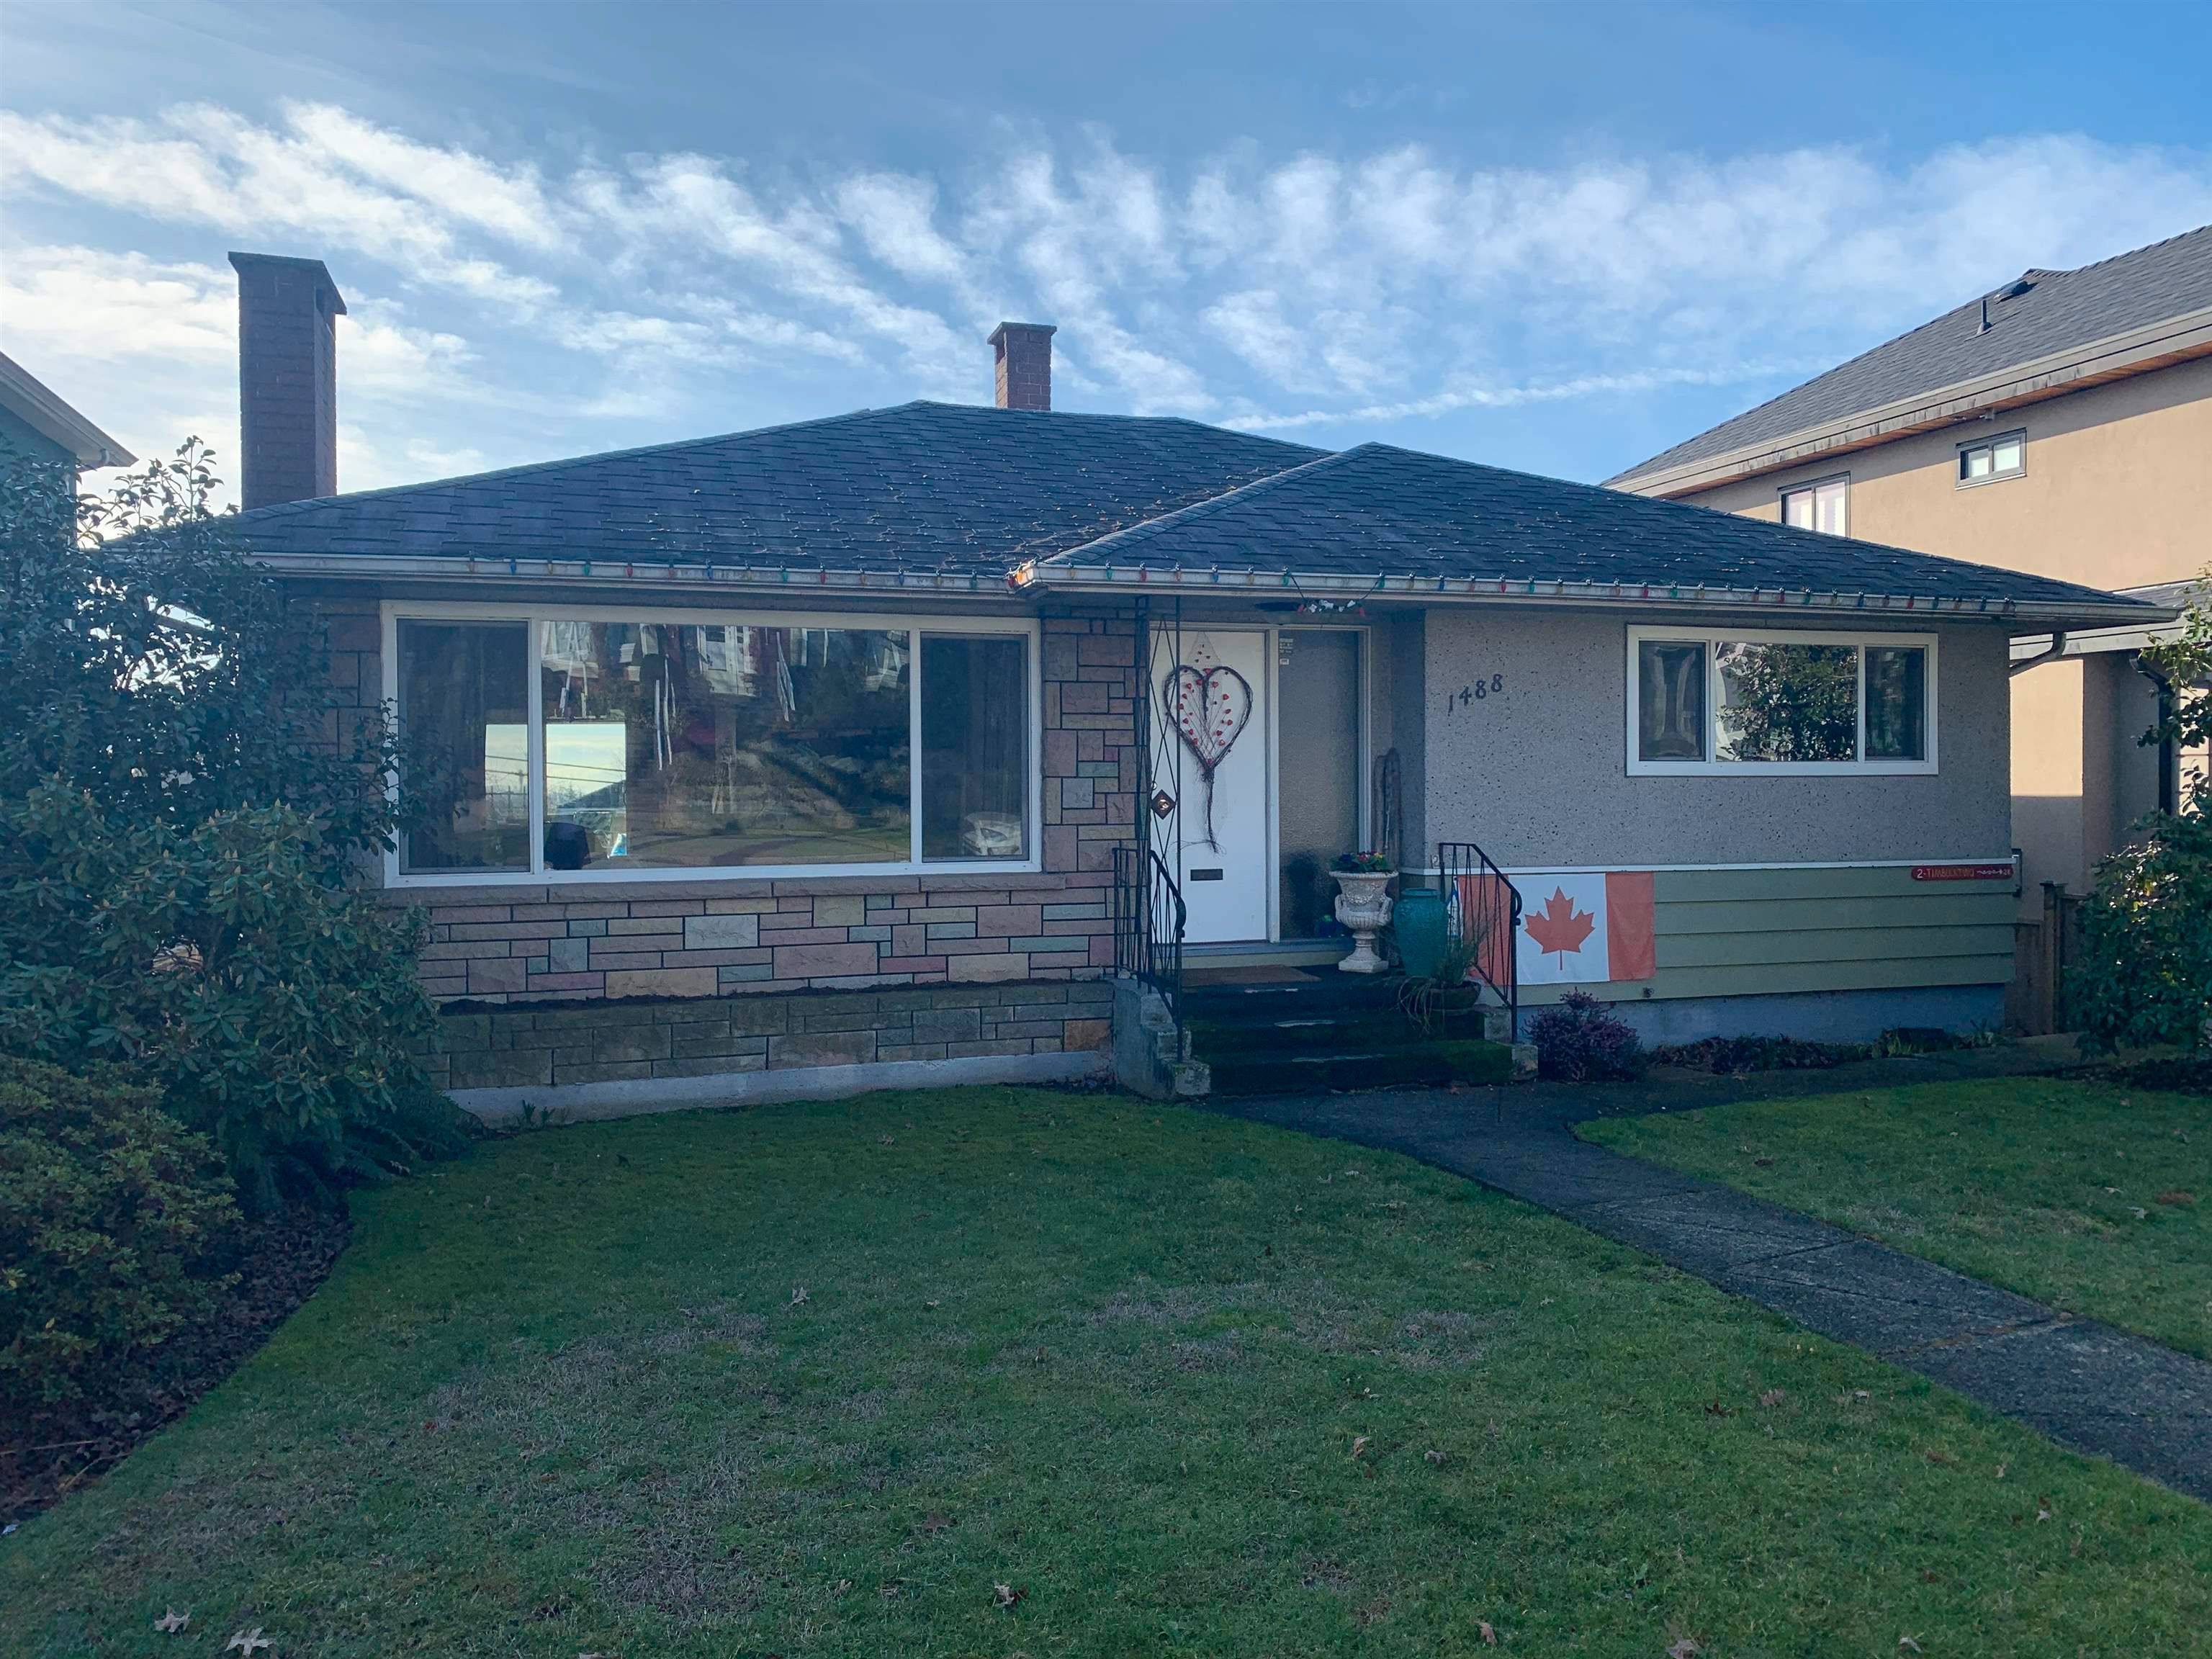 Main Photo: 1488 E 63RD Avenue in Vancouver: Fraserview VE House for sale (Vancouver East)  : MLS®# R2649953